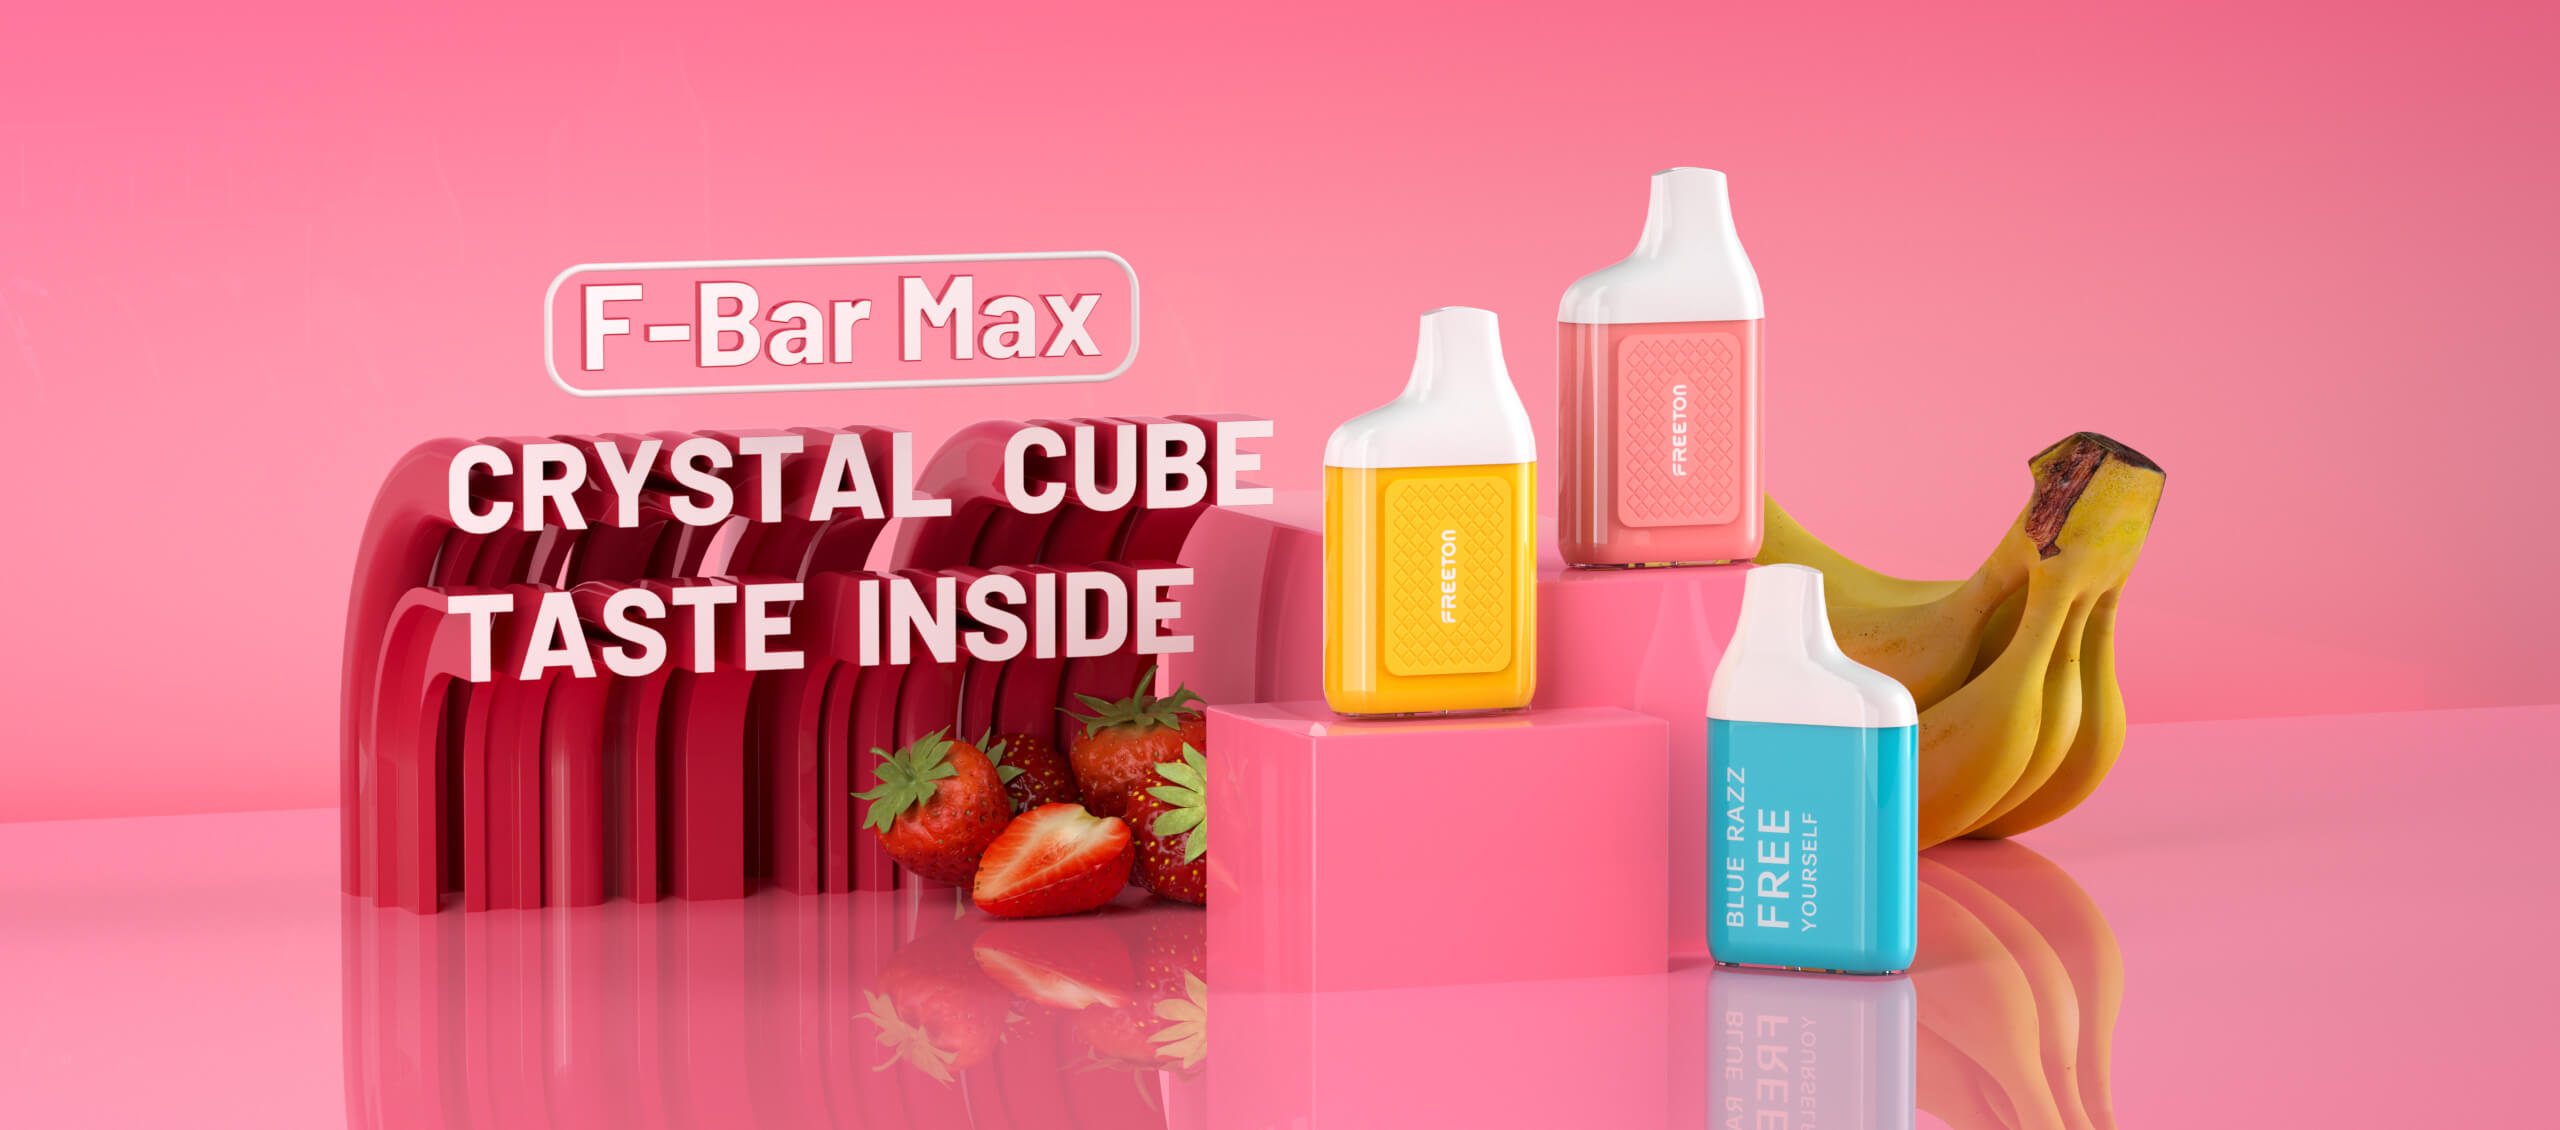 F-BAR MAX – The Most Iconic Electronic Cigarette